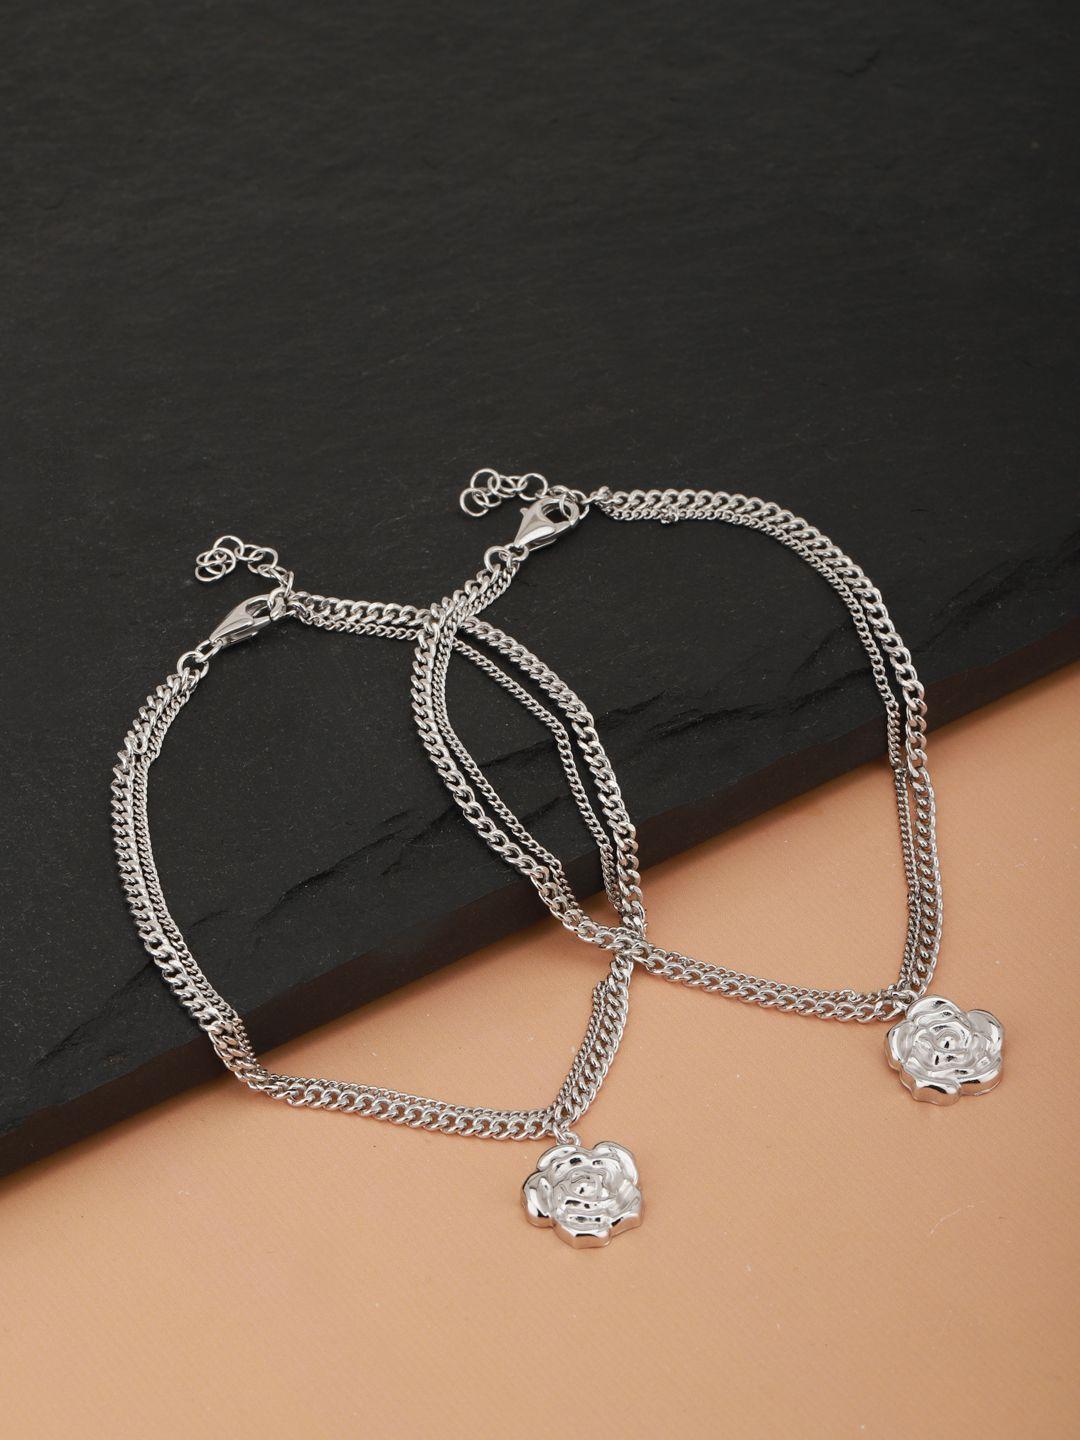 carlton london set of 2 silver-toned rhodium-plated floral-shaped layered anklets